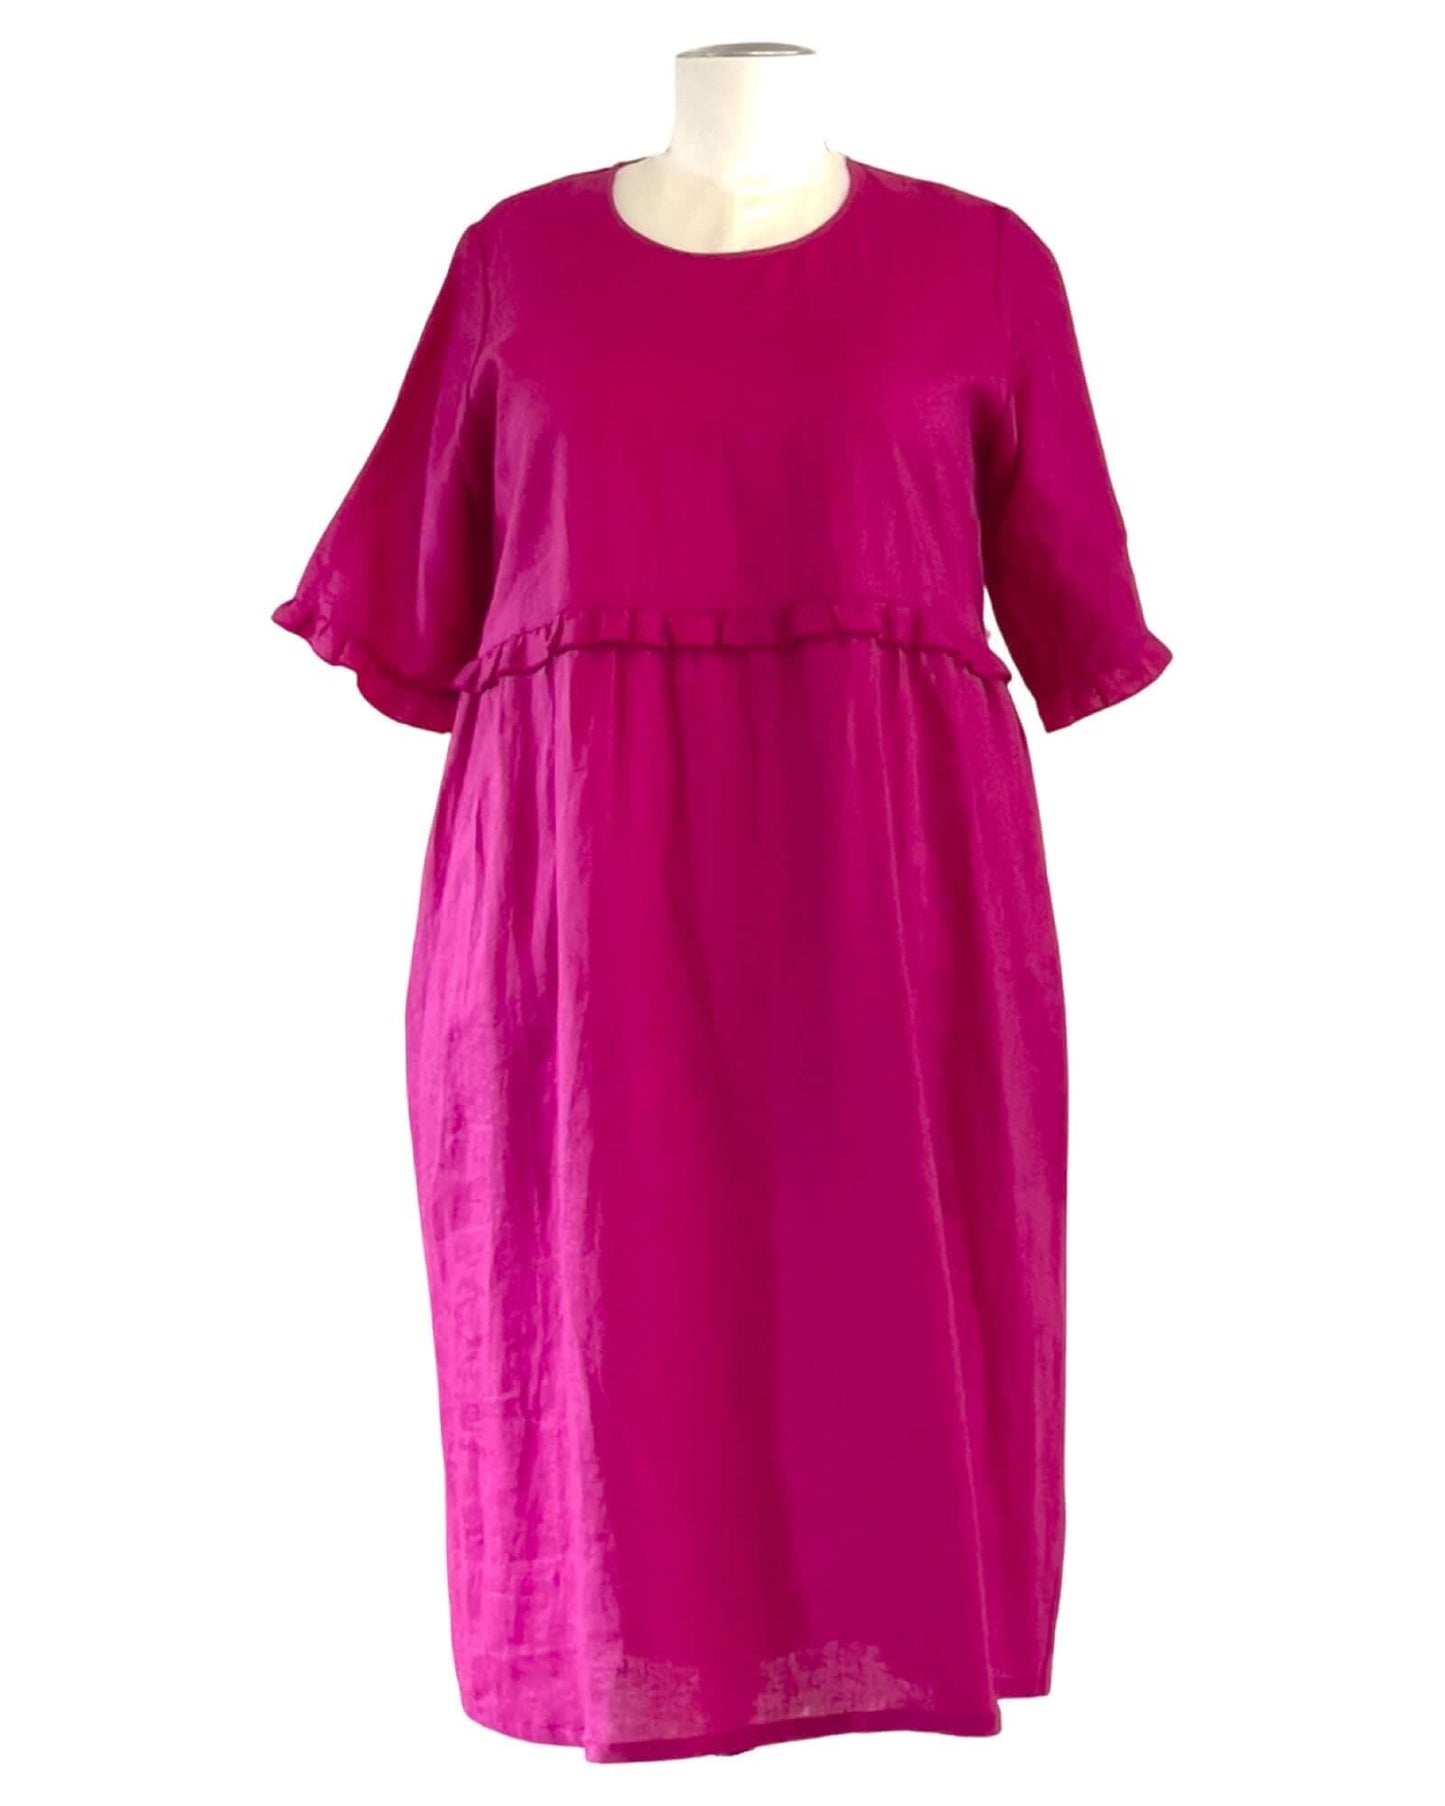 FRILLING & ABLE DRESS - Hot Pink